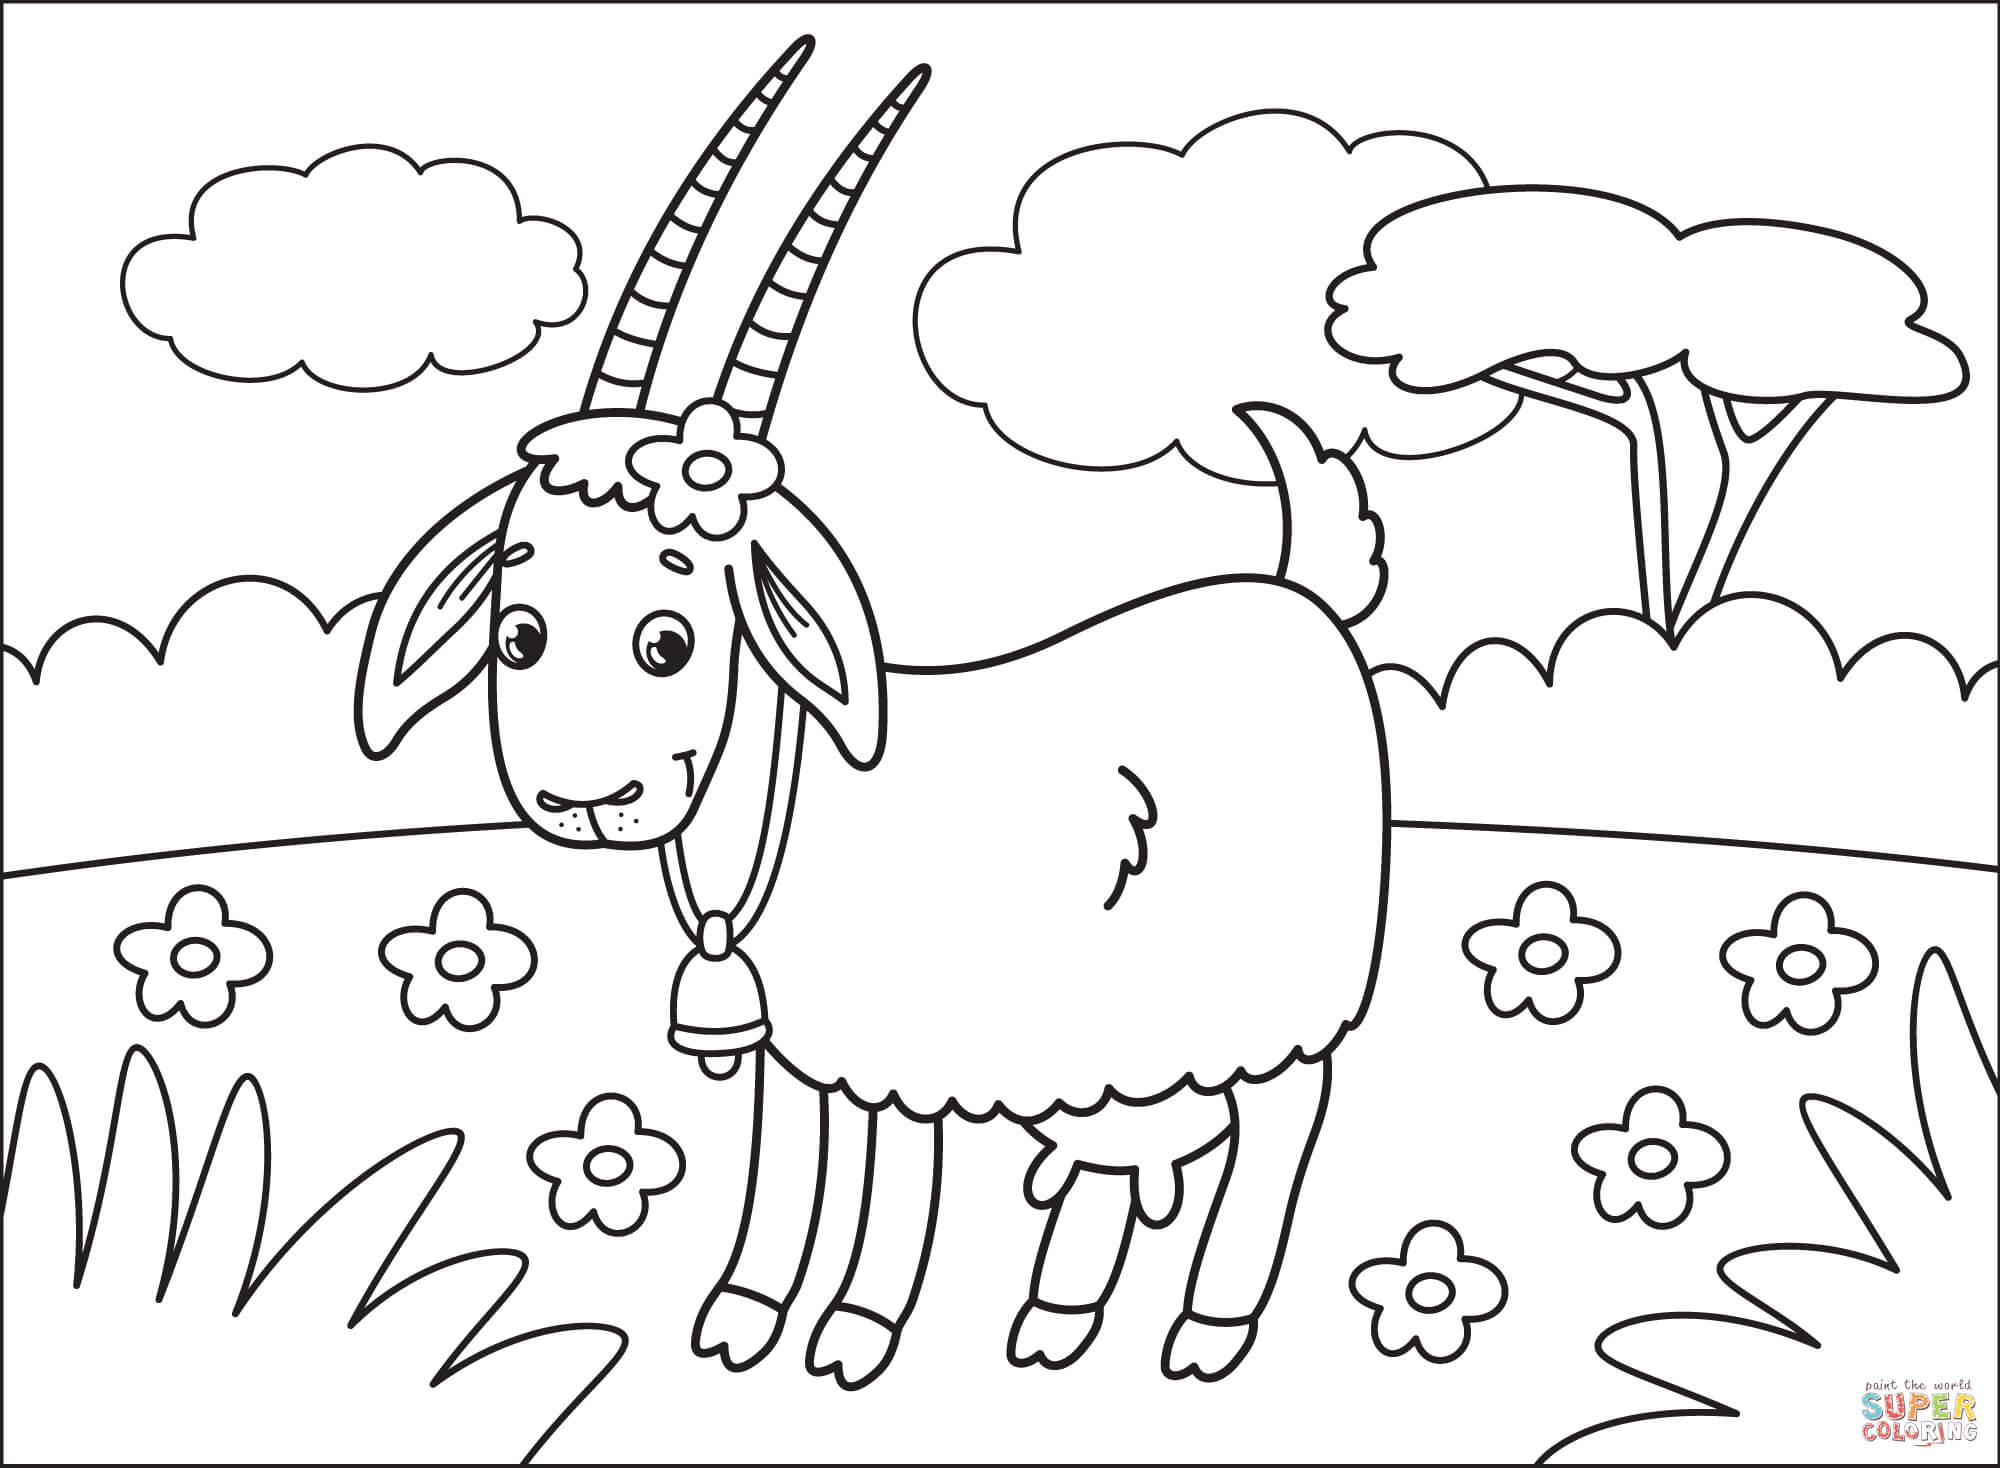 Goat coloring page free printable coloring pages